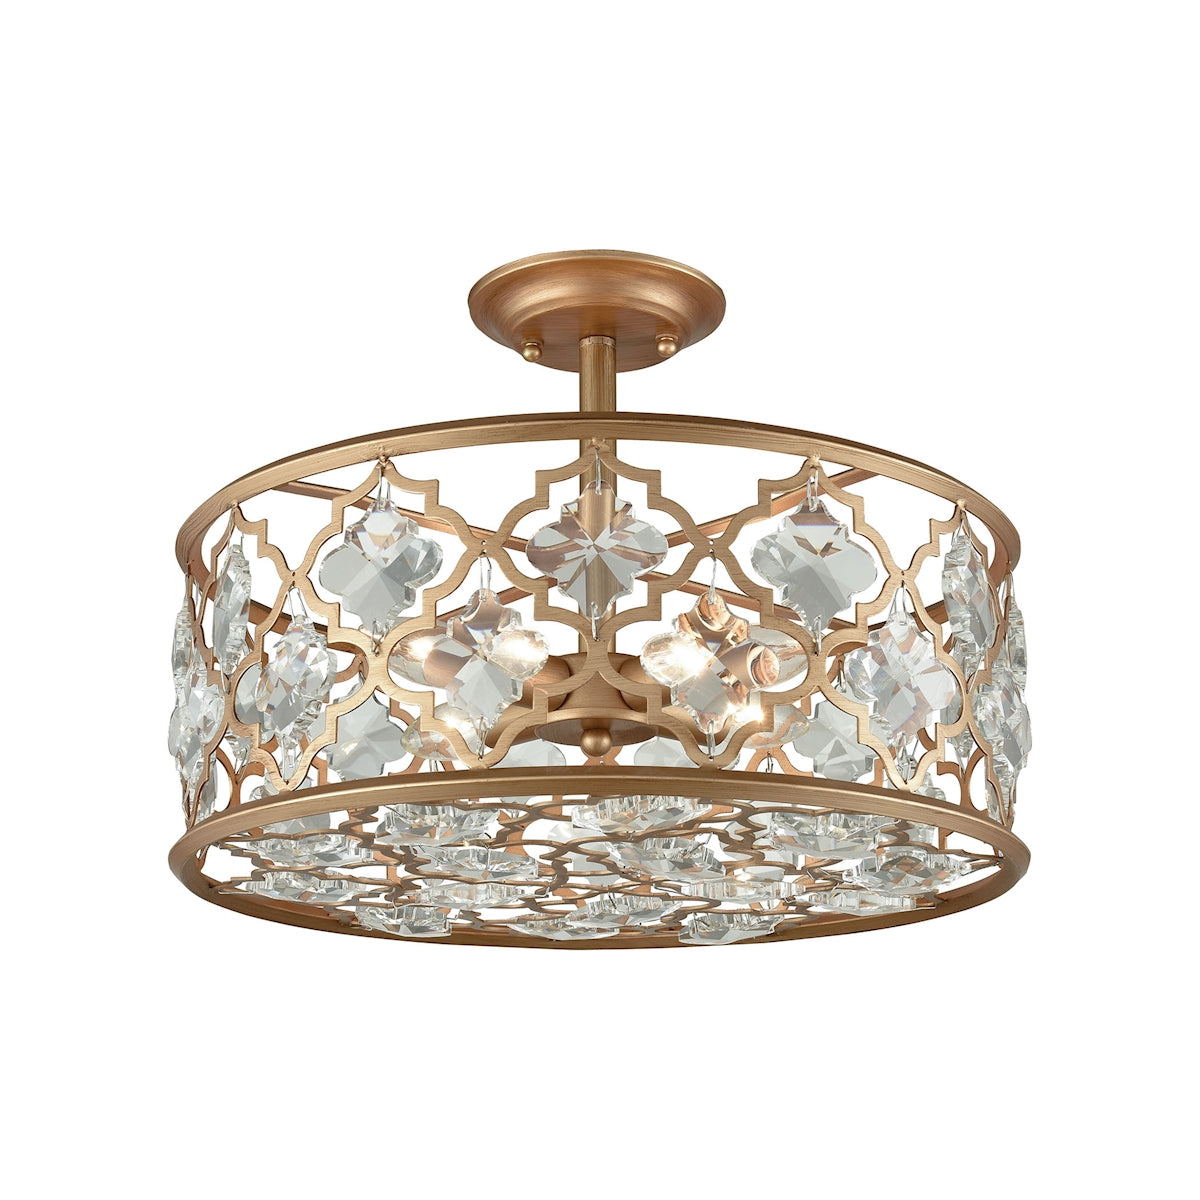 ELK Lighting 32092/4 Armand 4-Light Semi Flush in Matte Gold with Clear Crystals